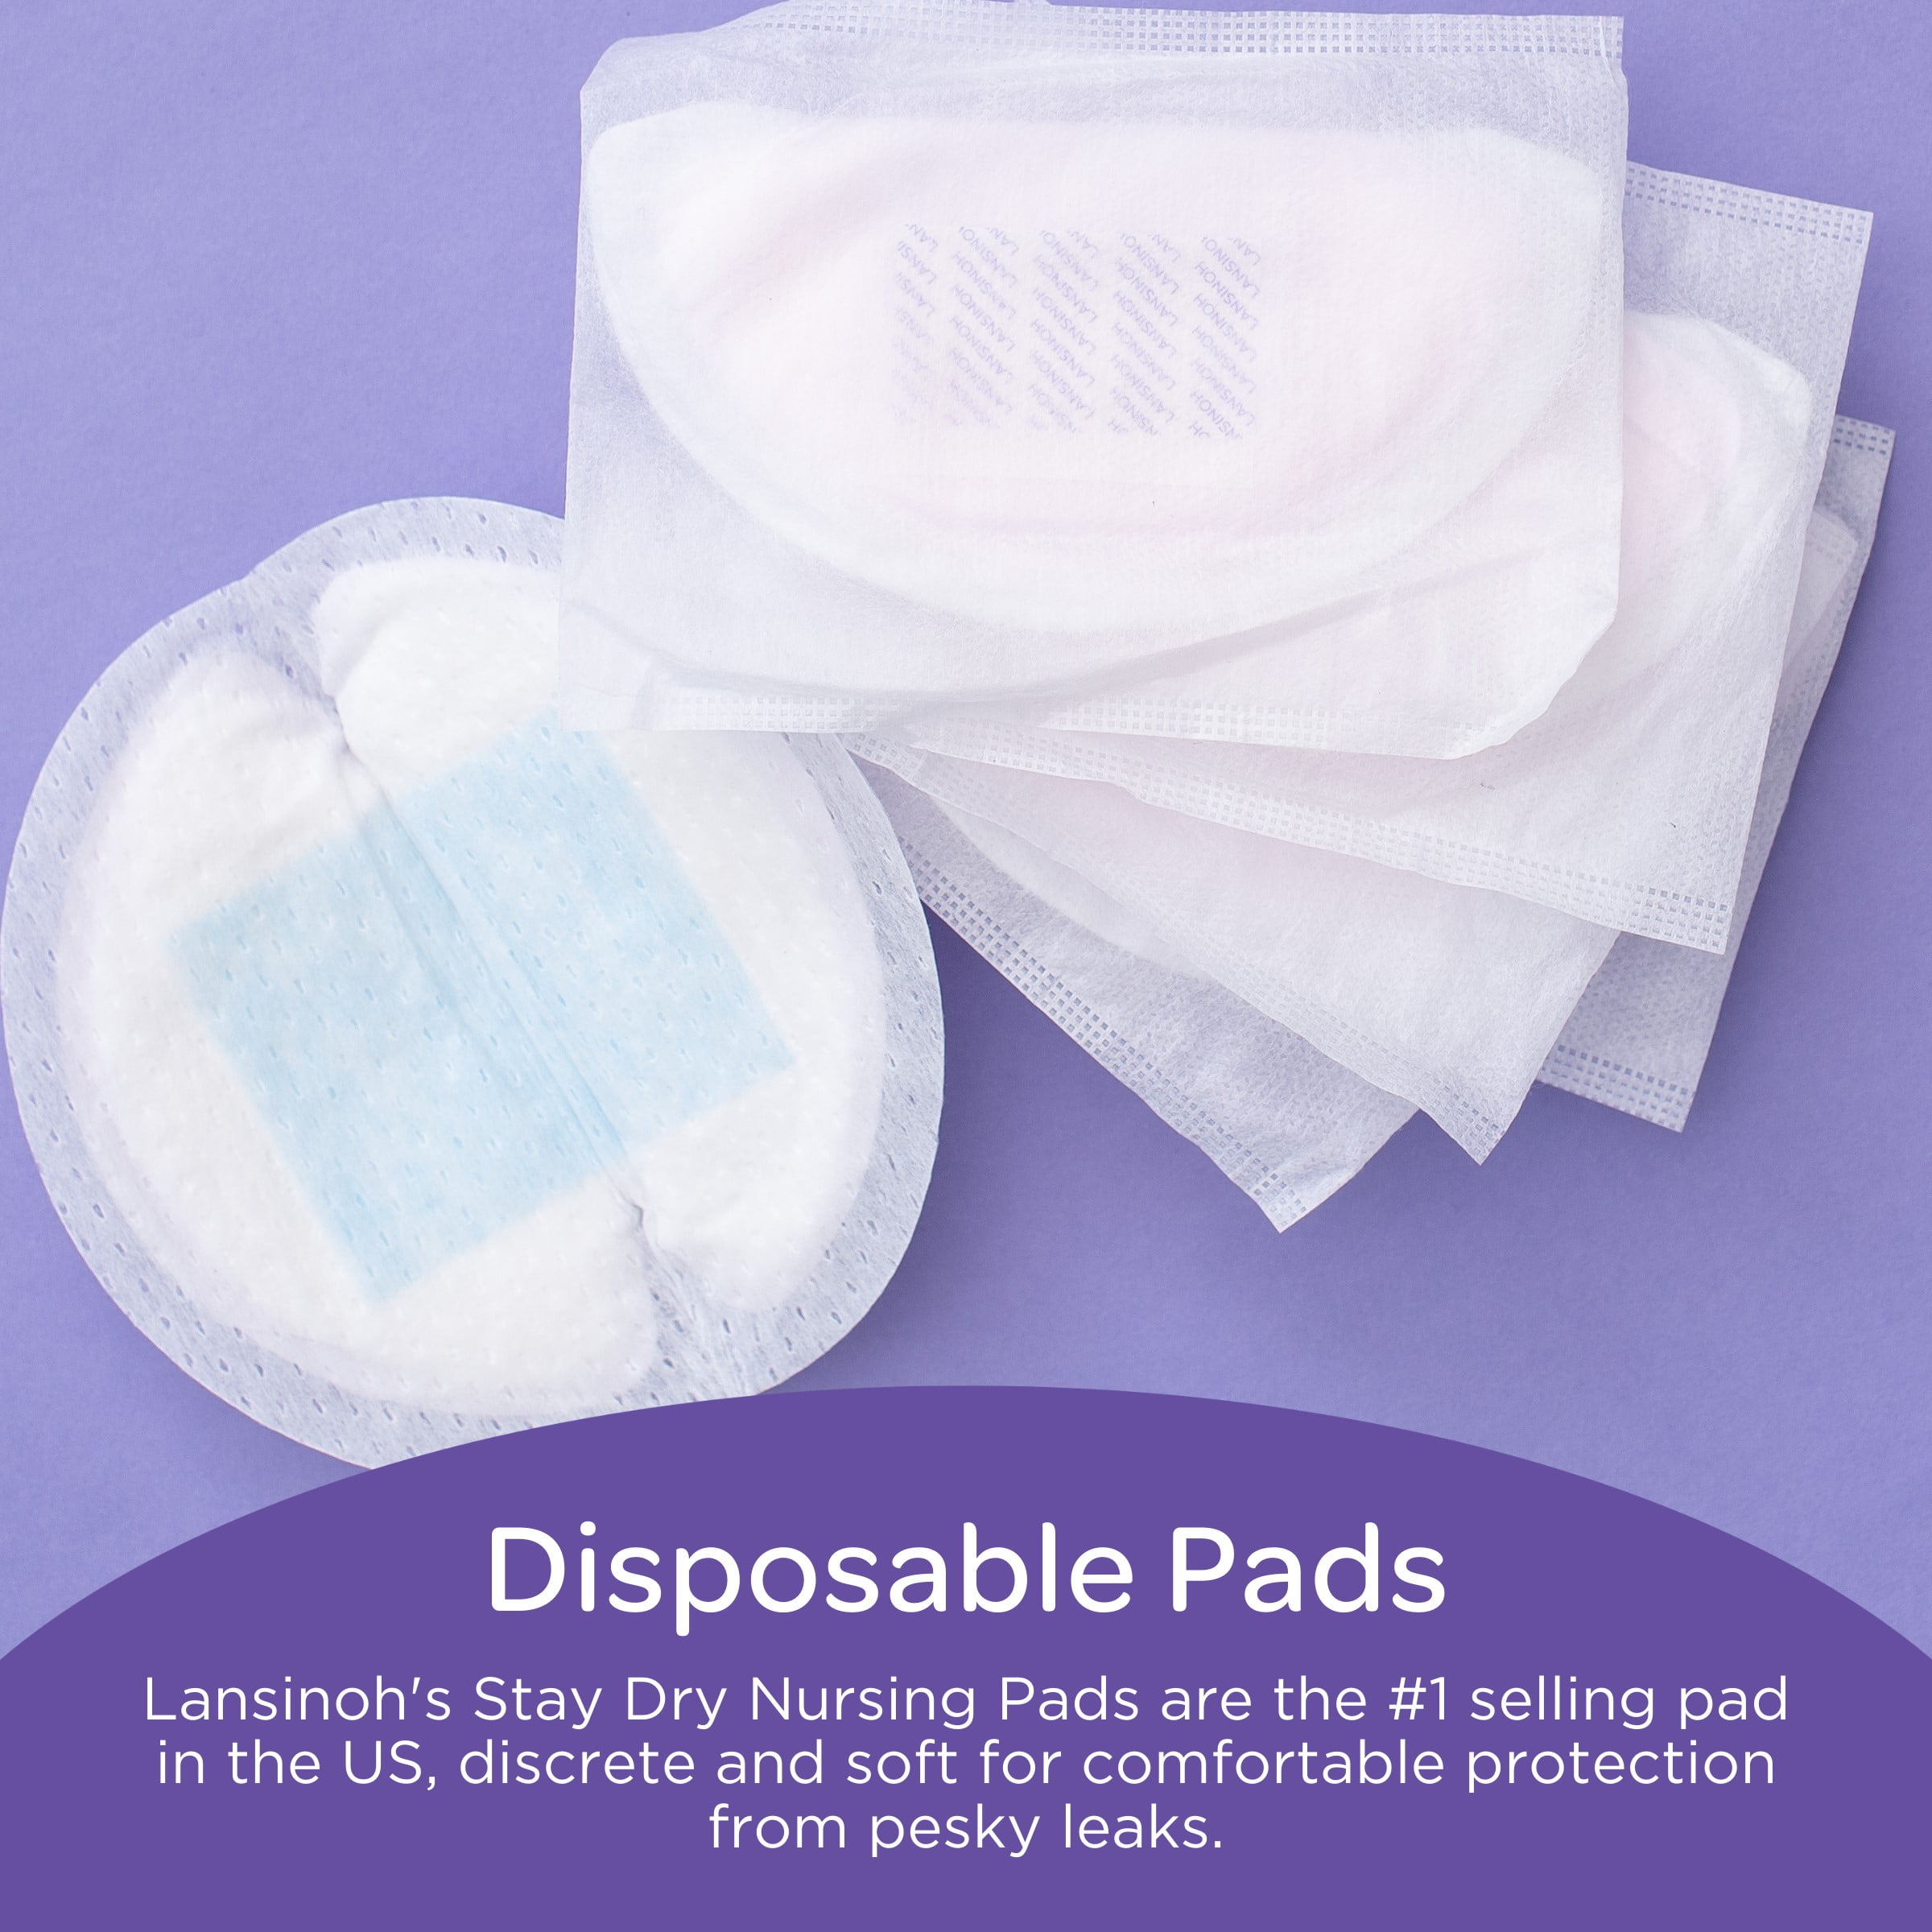 Dropship Purple Soothing Gel Pads For Breastfeeding In Section Postpartum  Essentials Kit Of 2 Pairs Pads With Covers. Reusable After Birth Warming  Lactation Massager For Nursing; Cooling; Pain Relief. to Sell Online